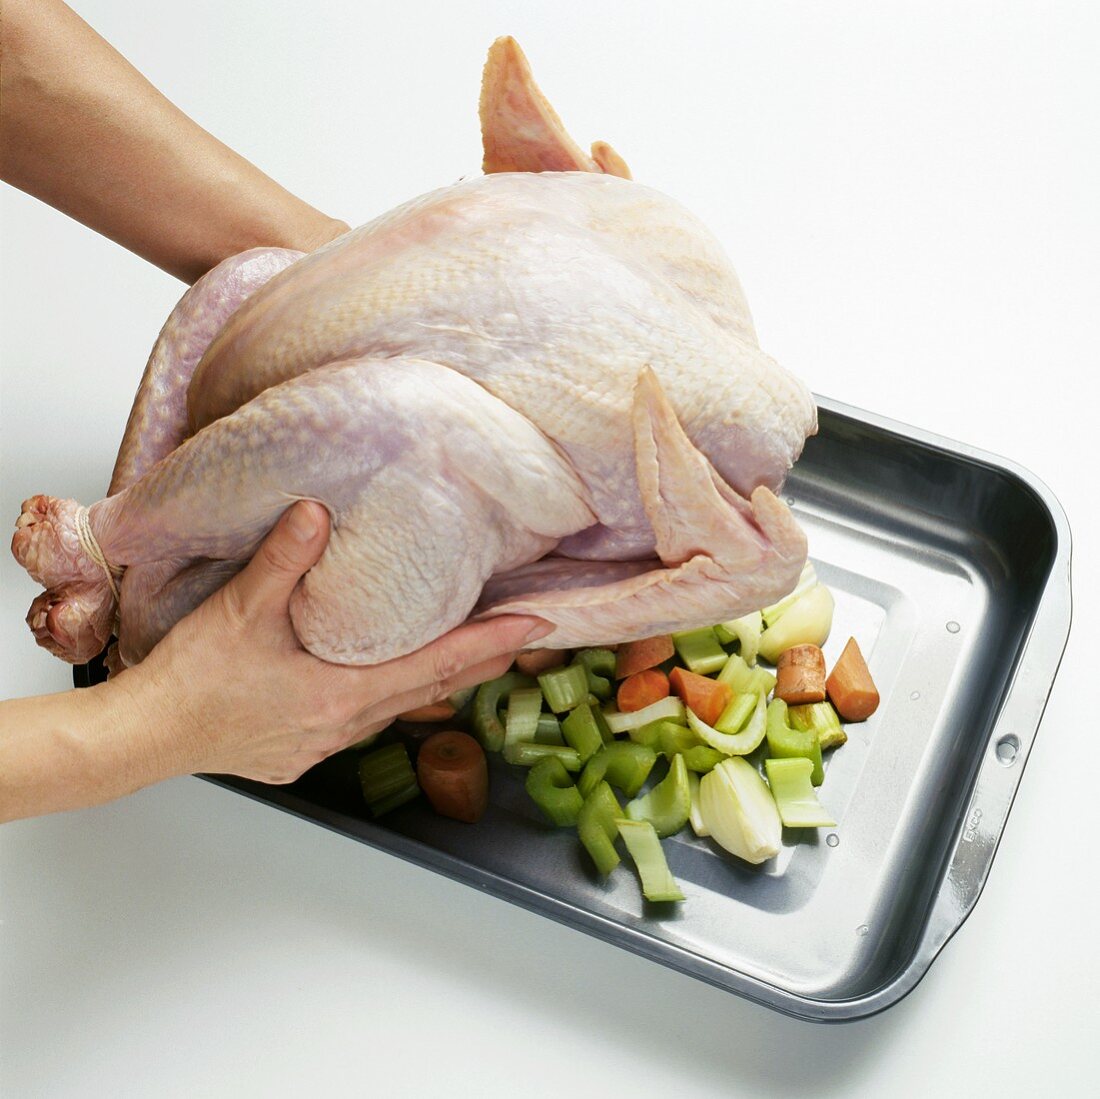 Placing Whole Chicken on a Bed of Vegetables for Roasting